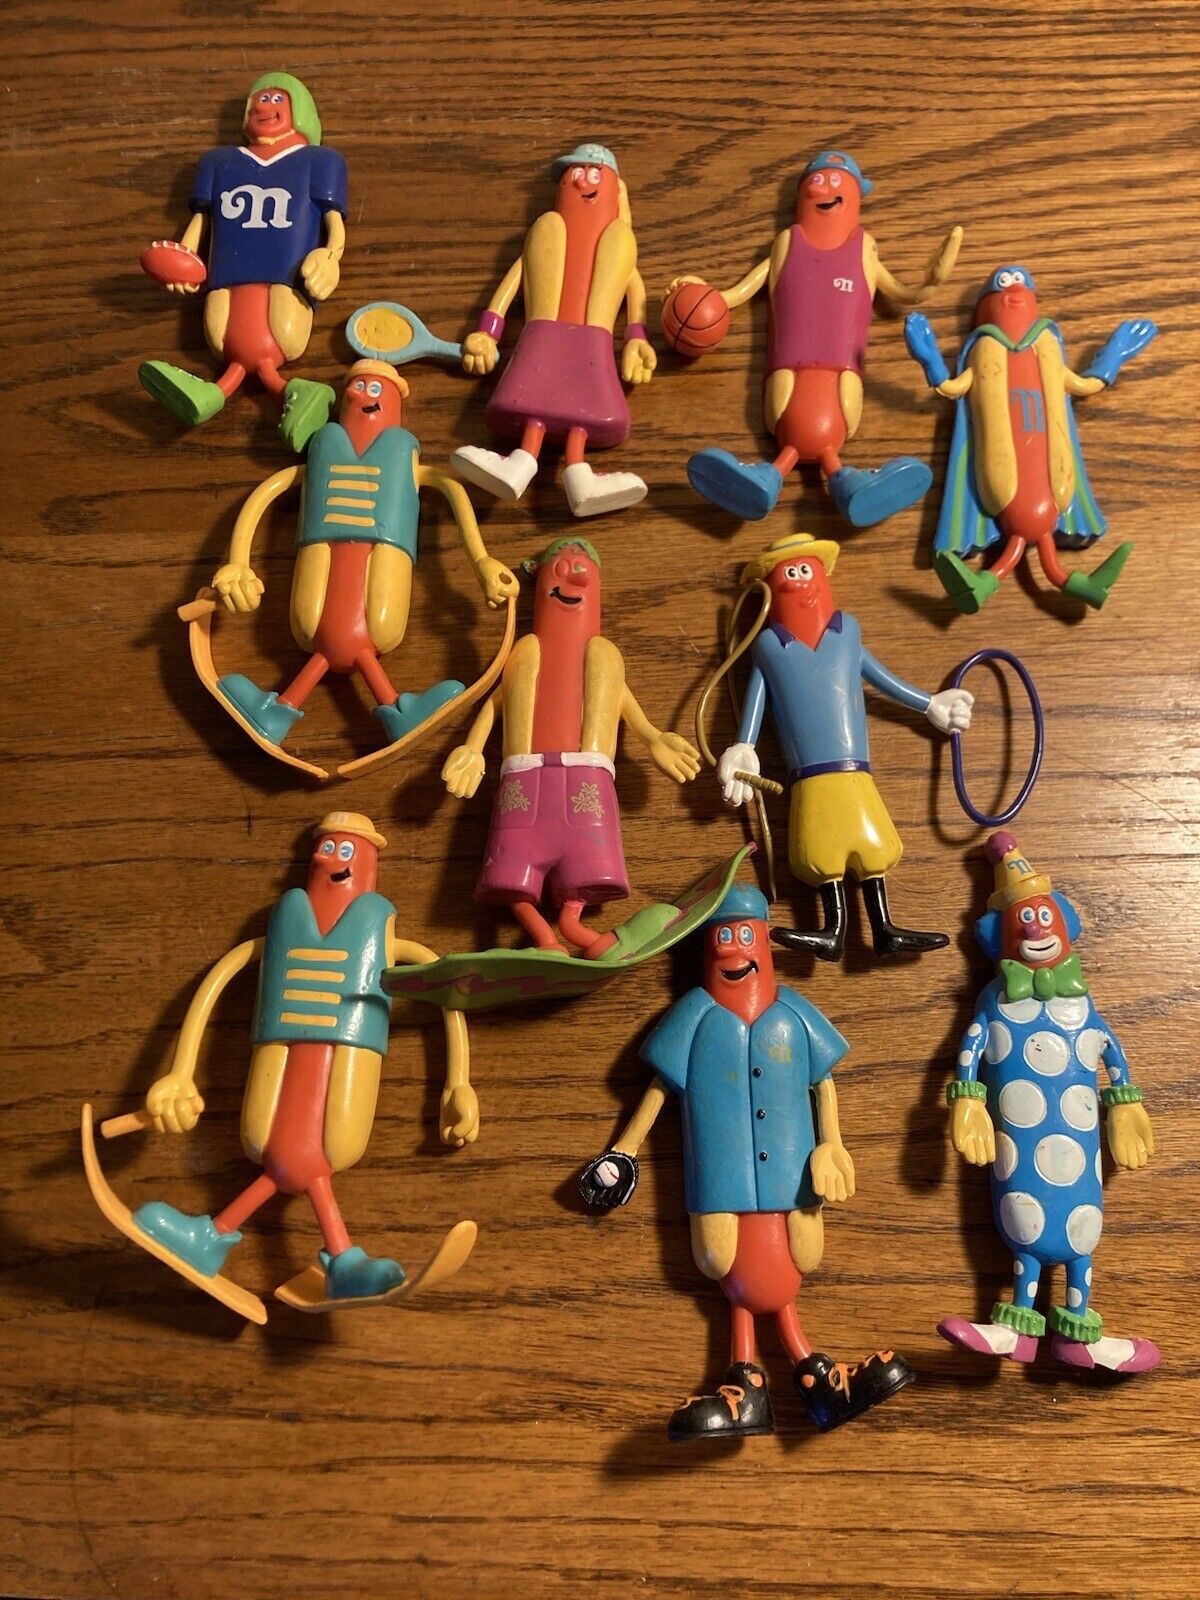 10 Vintage 1990s NATHANS FAMOUS HOT DOG ADVERTISING FIGURES Bendy